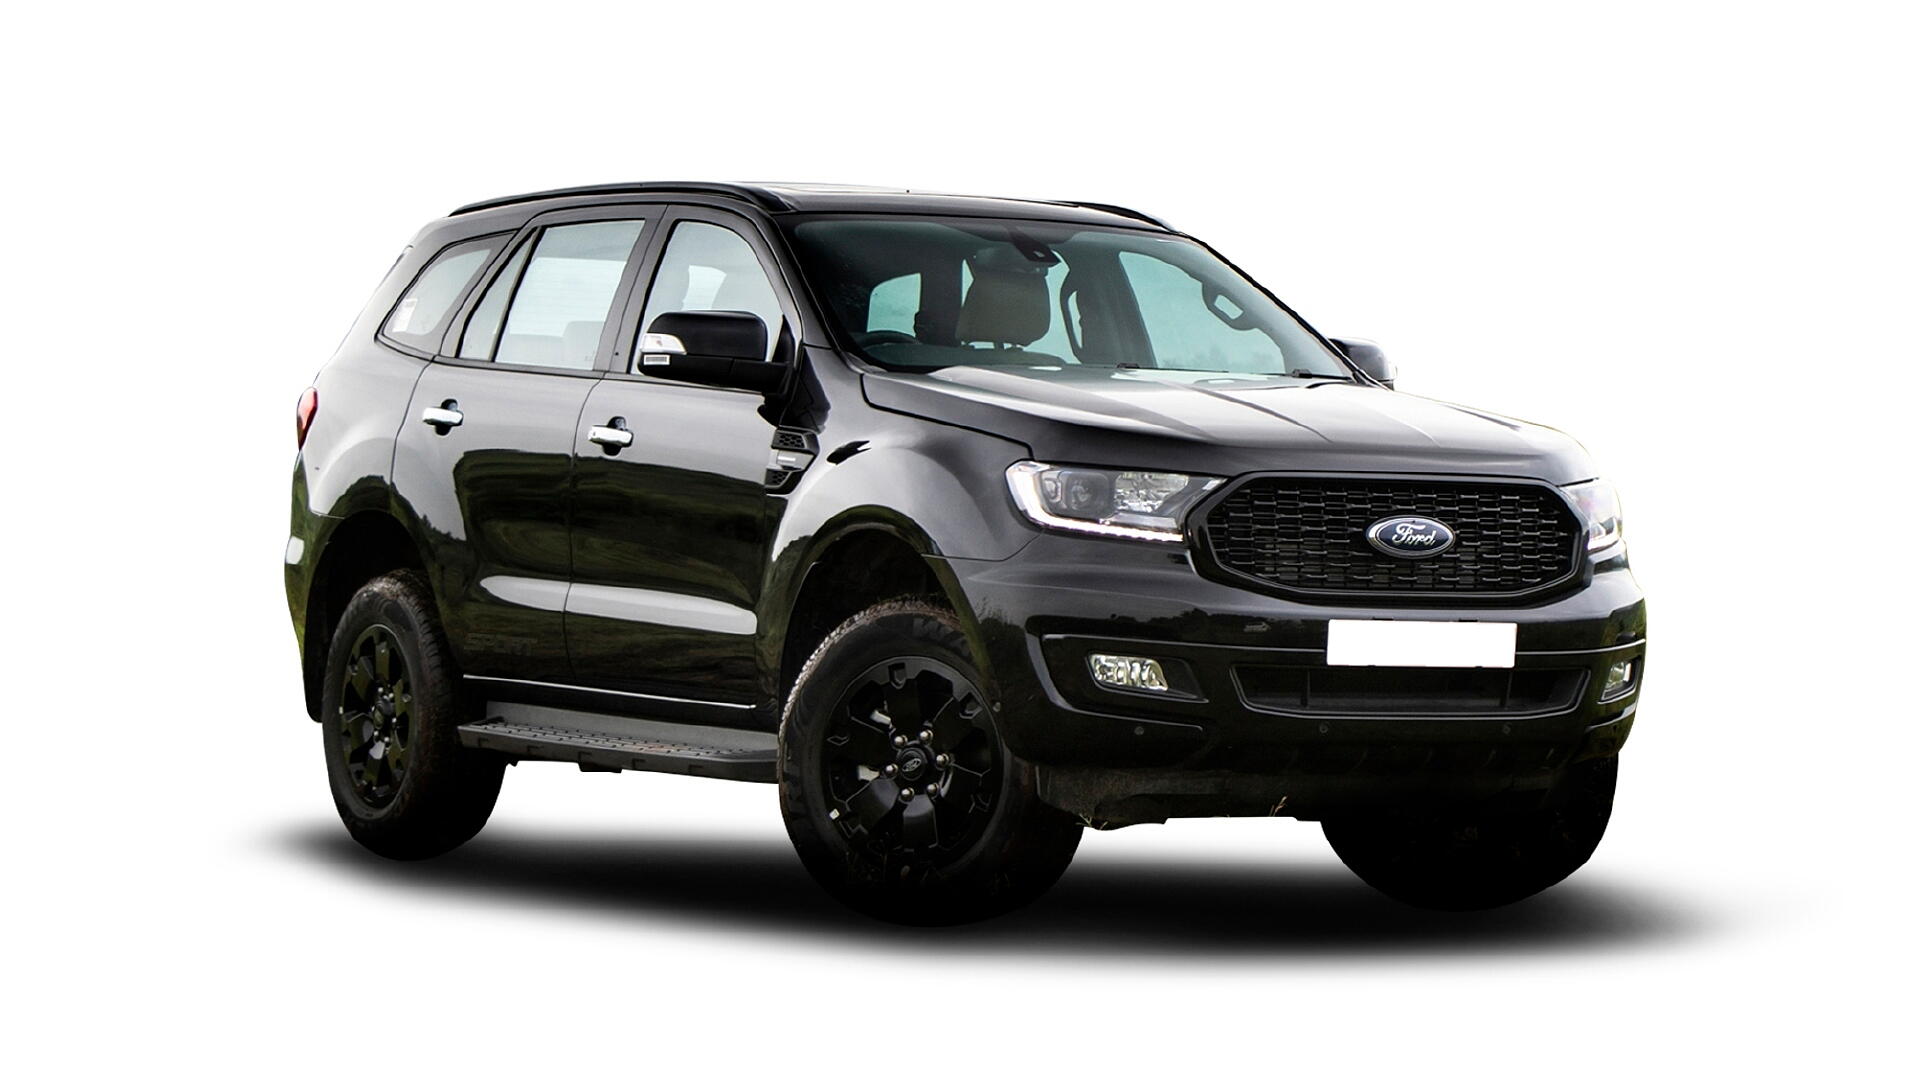 Ford Endeavour Images